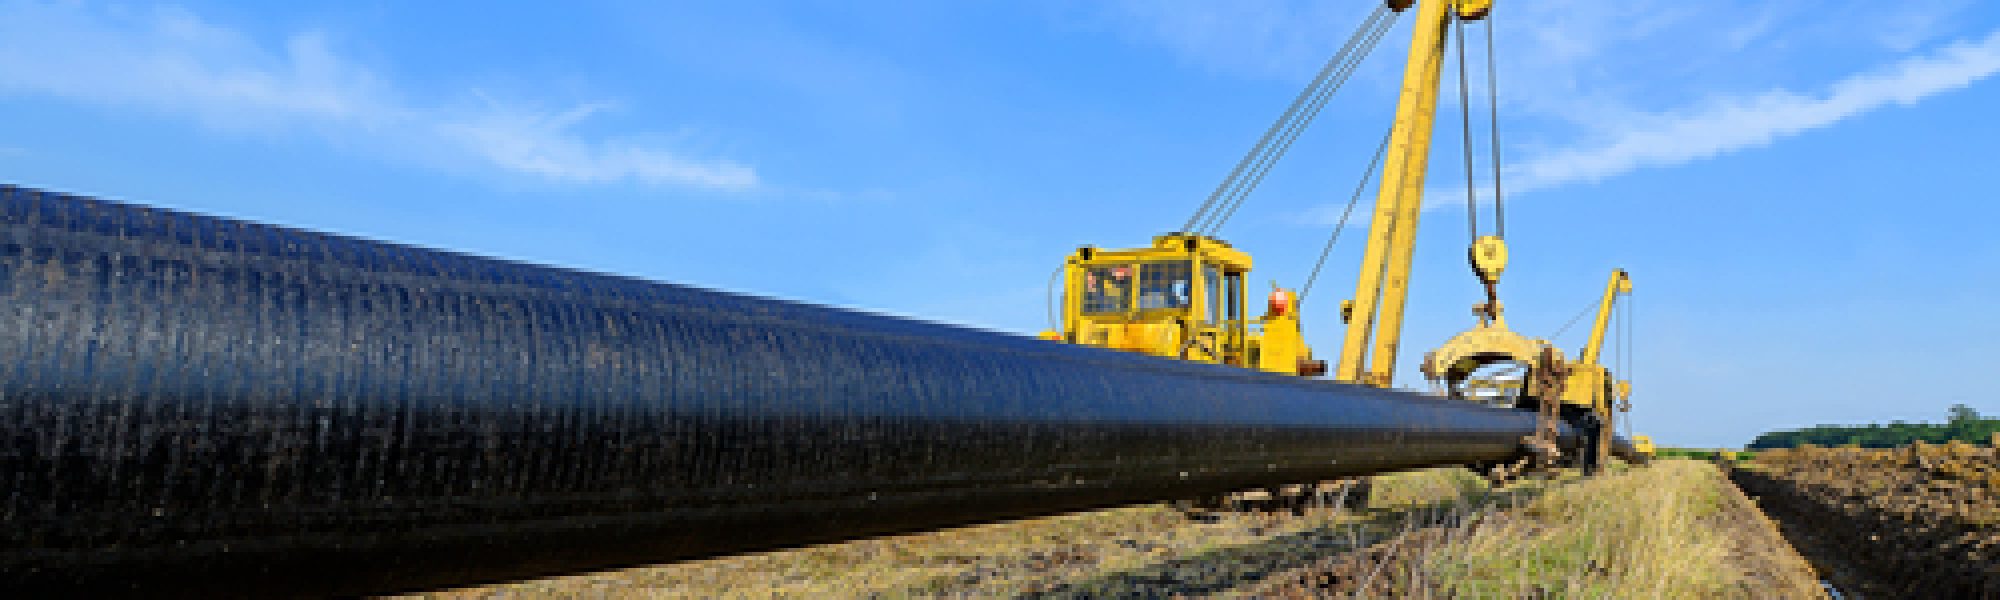 Virginia Natural Gas uses new technology to reduce emissions during pipeline repair, inspection